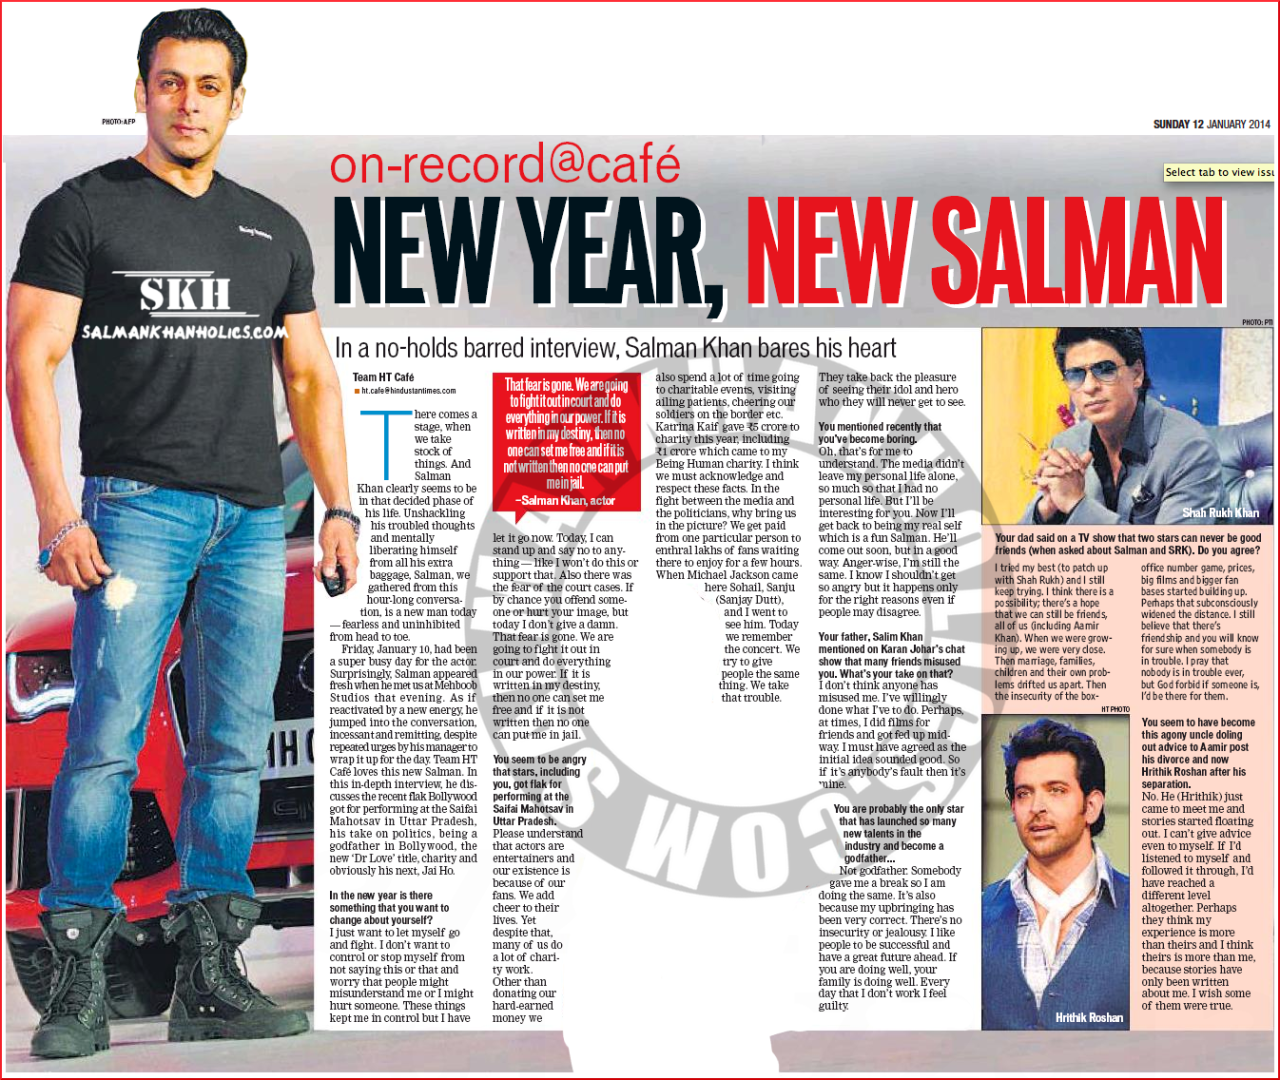 khan - ★ (Interview) New Year, New Salman! In a no-holds barred interview, Salman Khan bares his heart… Tumblr_mz9mqqDXm31qctnzso1_1280